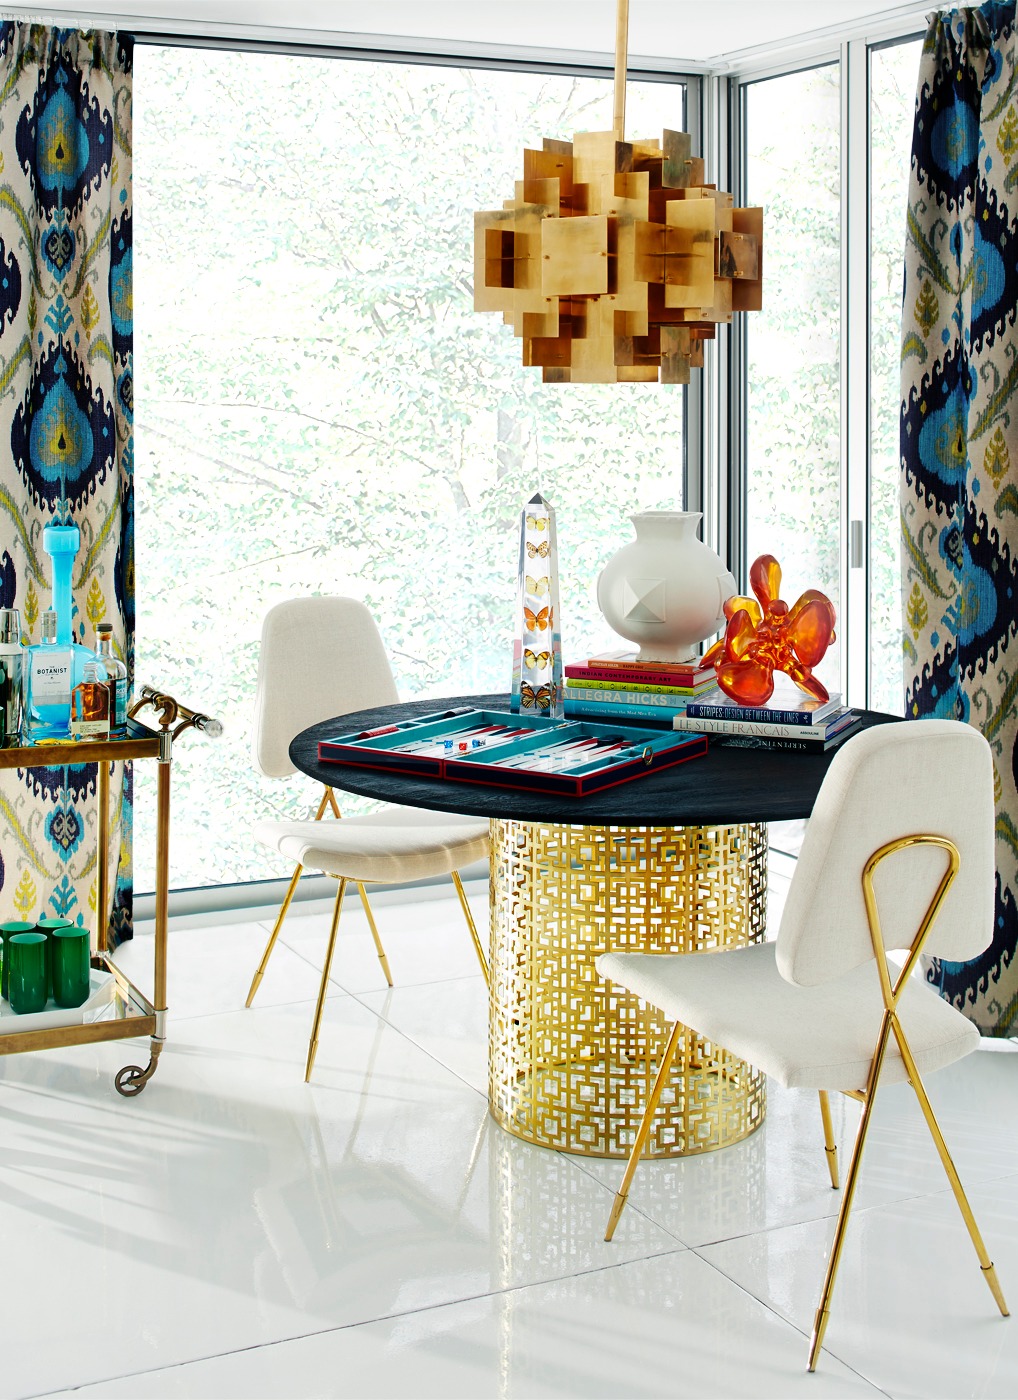 Lighting by Jonathan Adler - Mad About The House